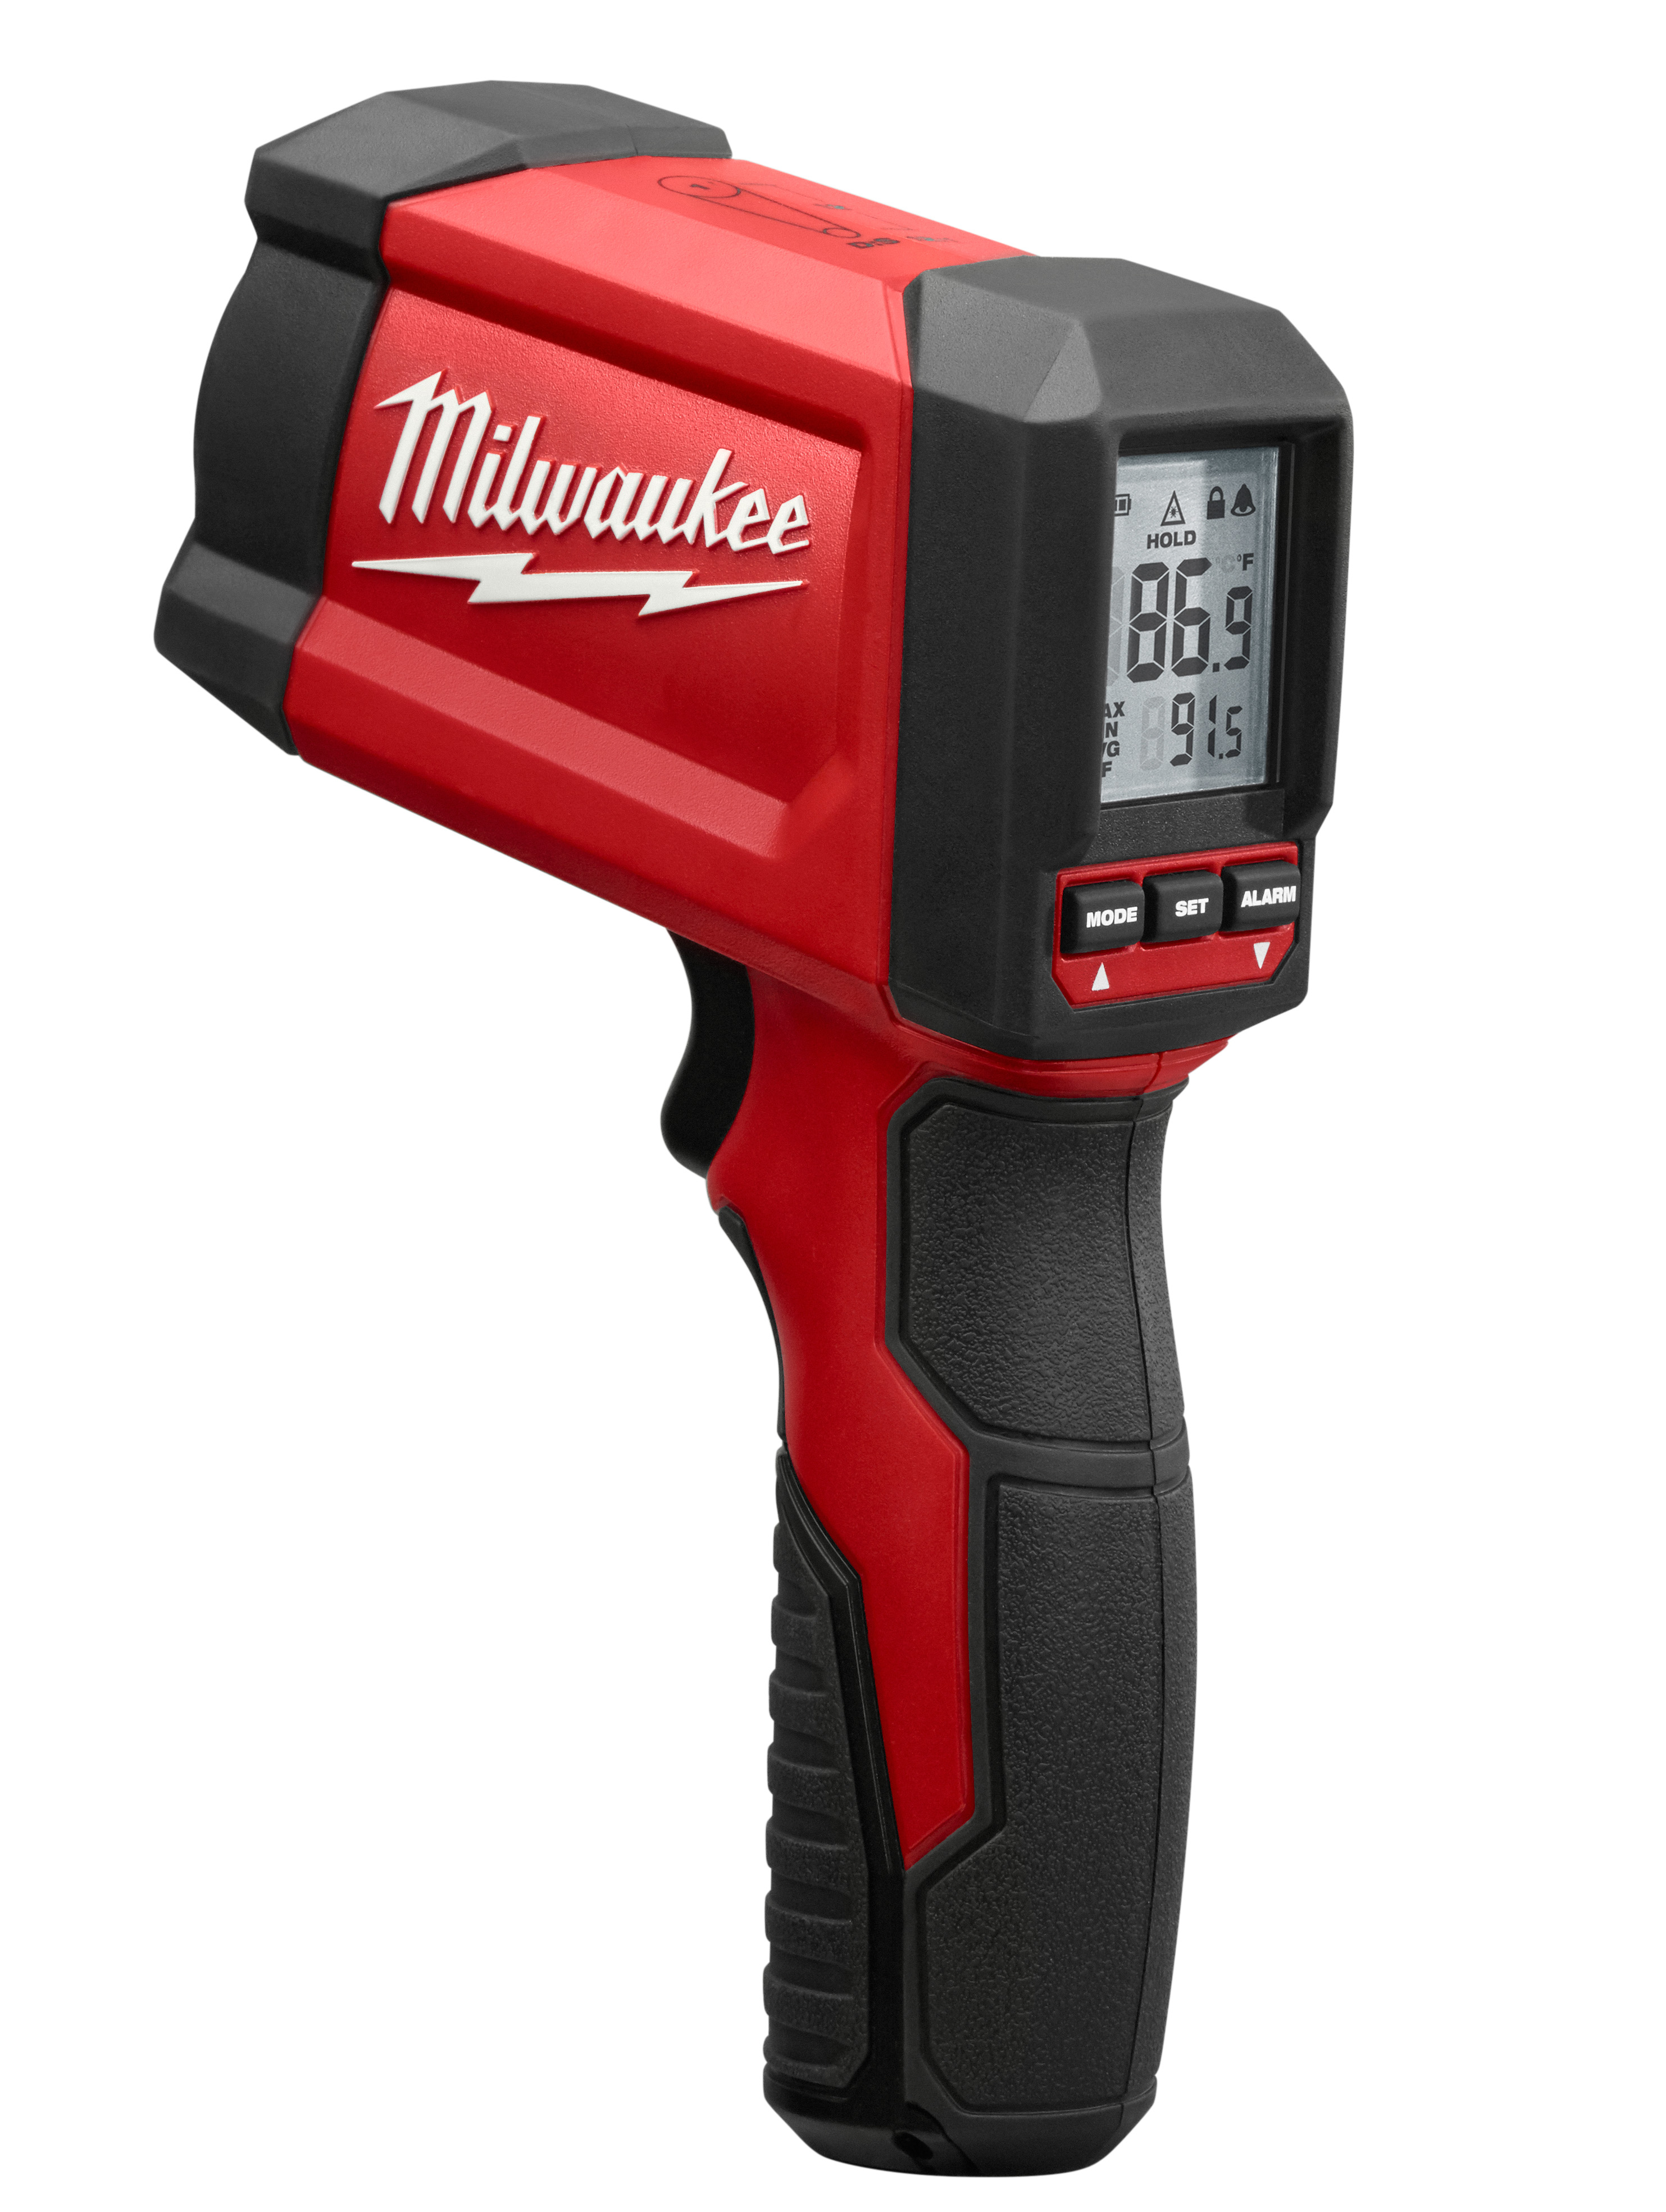 Milwaukee® 2268-20 Infrared Thermometer, -22 to 1472 deg F, +/-1.8 % Accuracy, 12:1 Focus Spot, 0.96 Fixed, 9 VDC Alkaline Battery